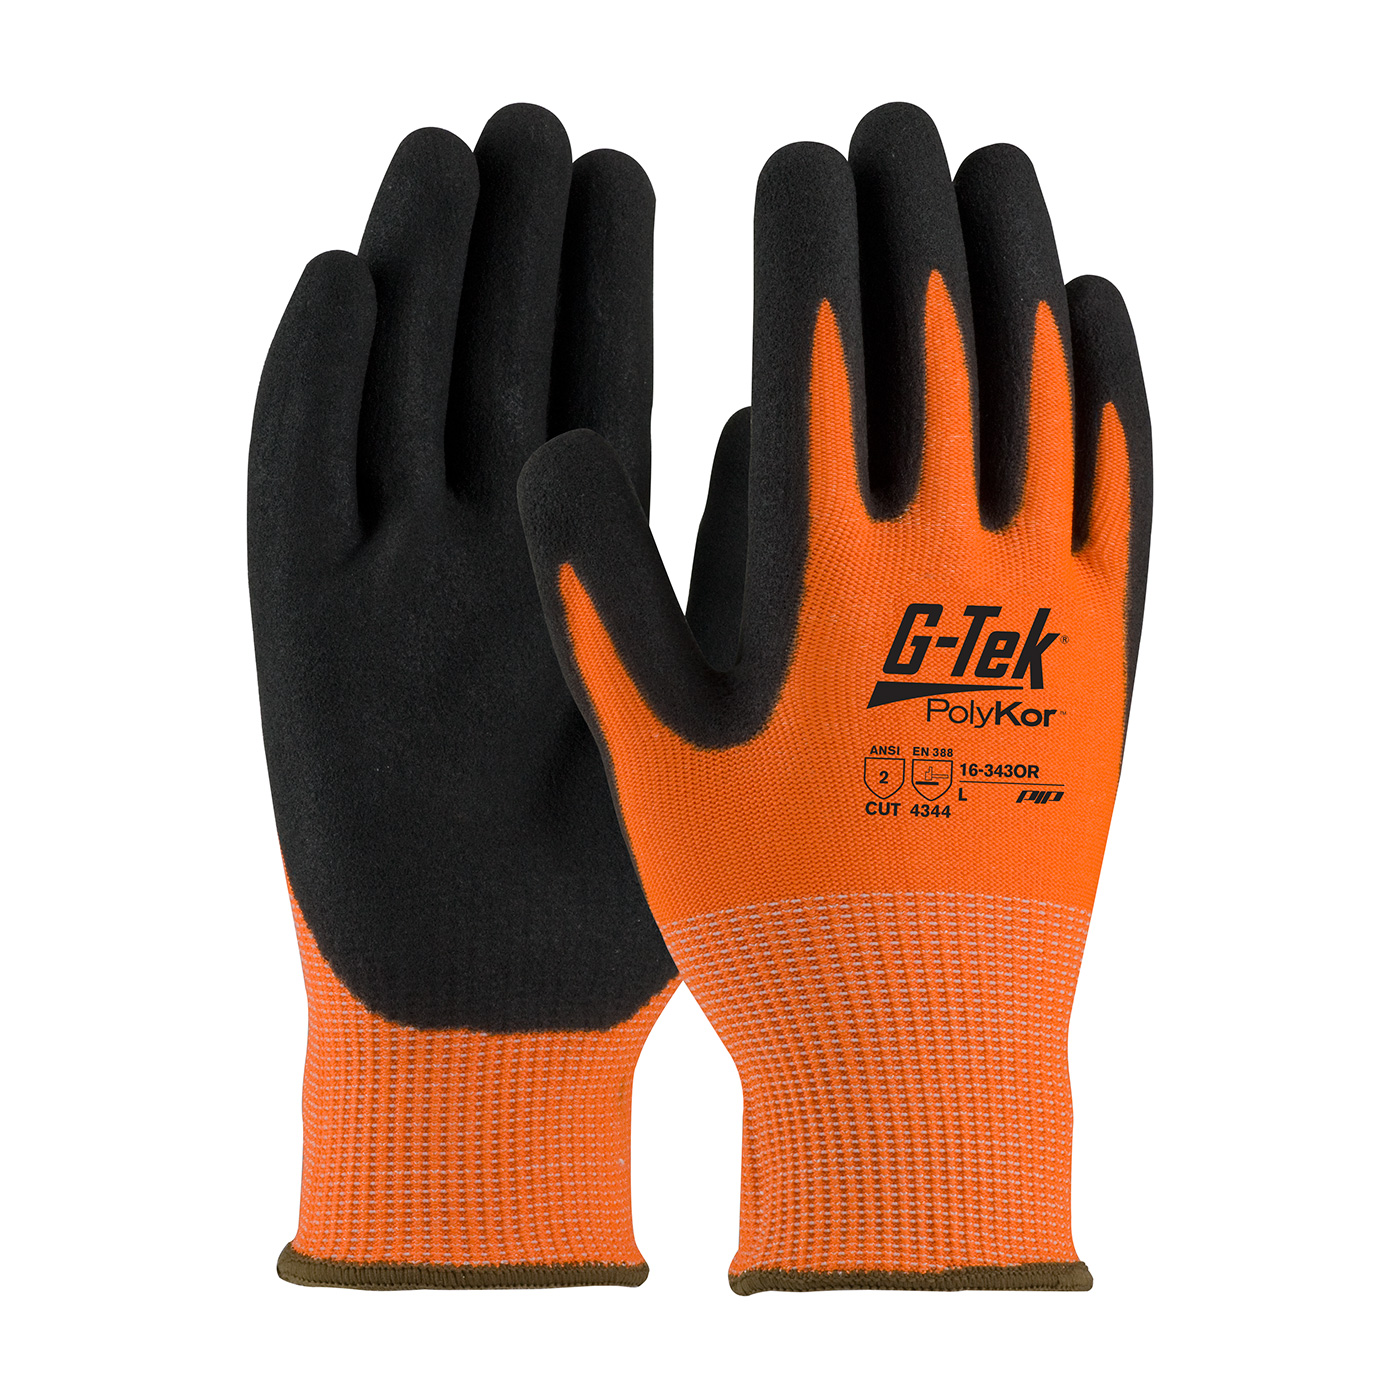 PIP 16-343OR/M G-Tek PolyKor Hi-Vis Seamless Knit PolyKor Blended Glove with Double-Dipped Nitrile Coated MicroSurface Grip on Palm & Fingers - Medium PID-16 343OR M